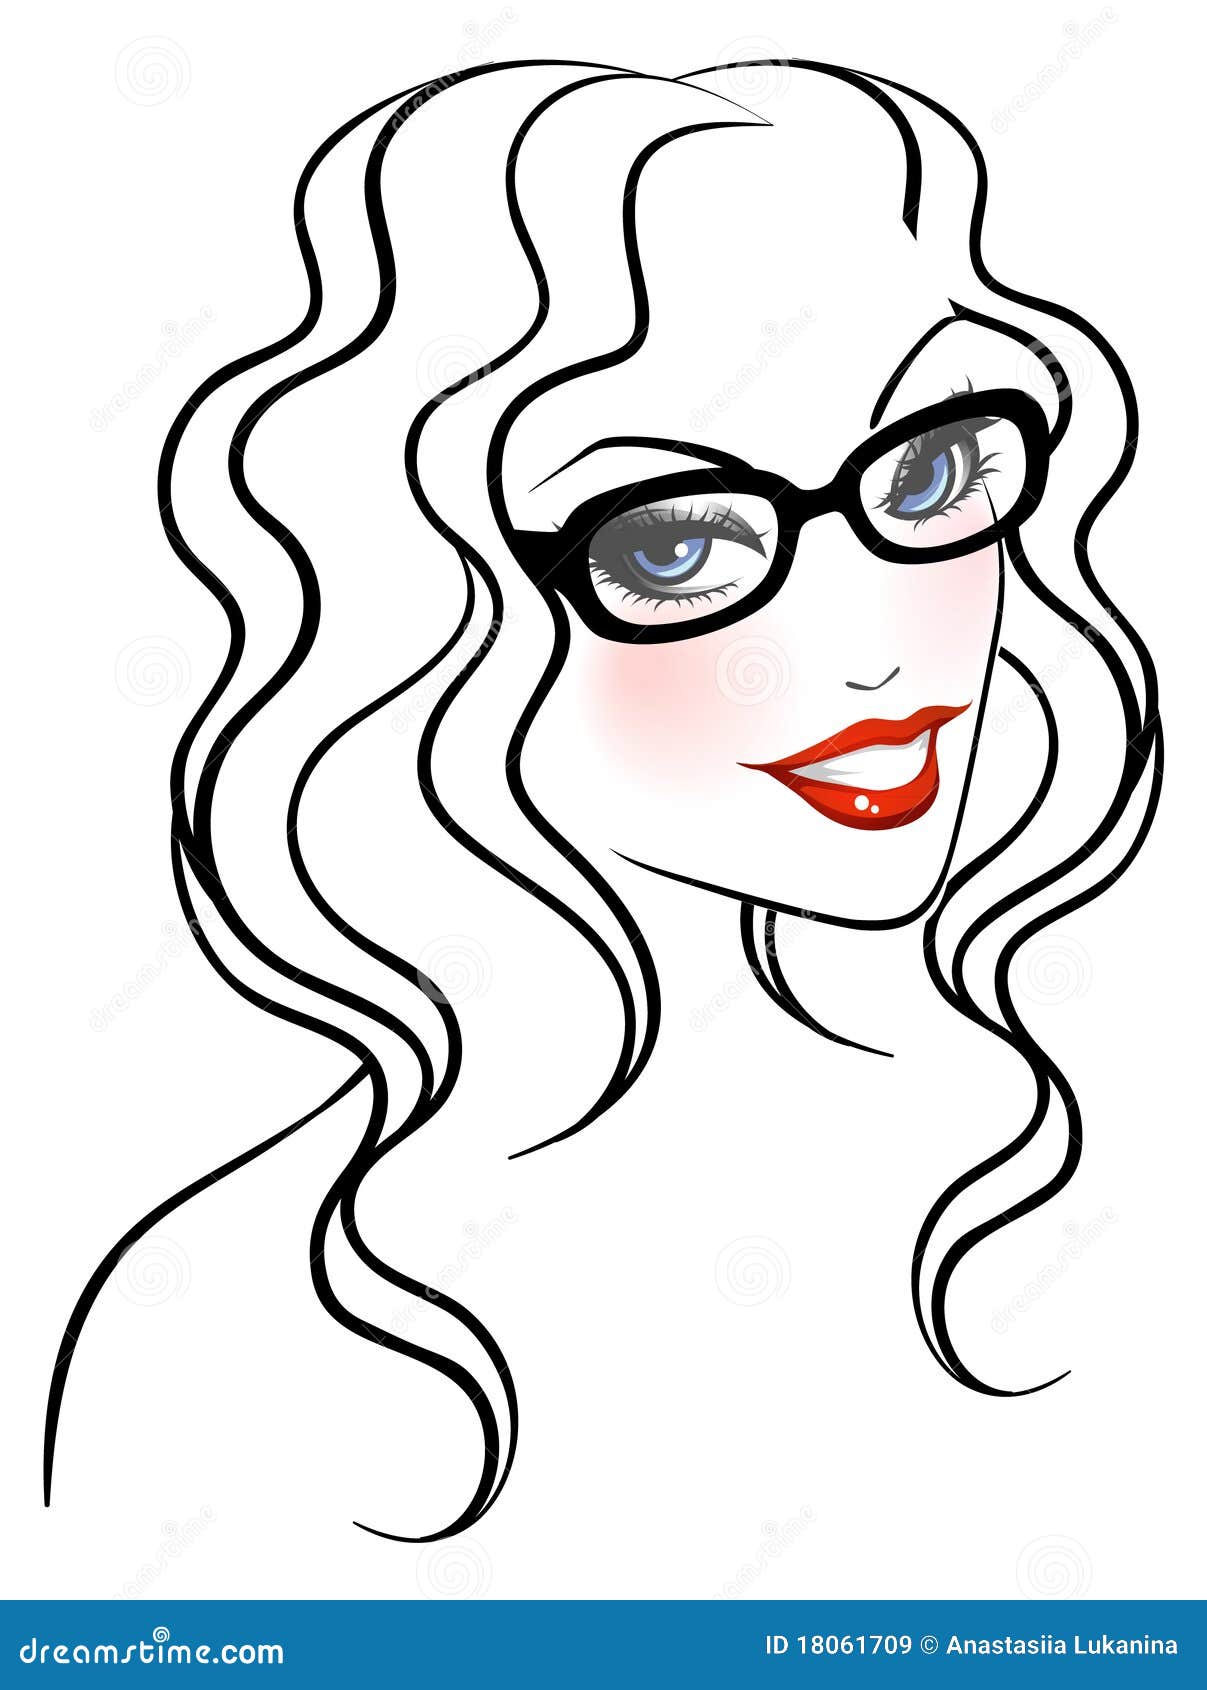 clipart girl with glasses - photo #28